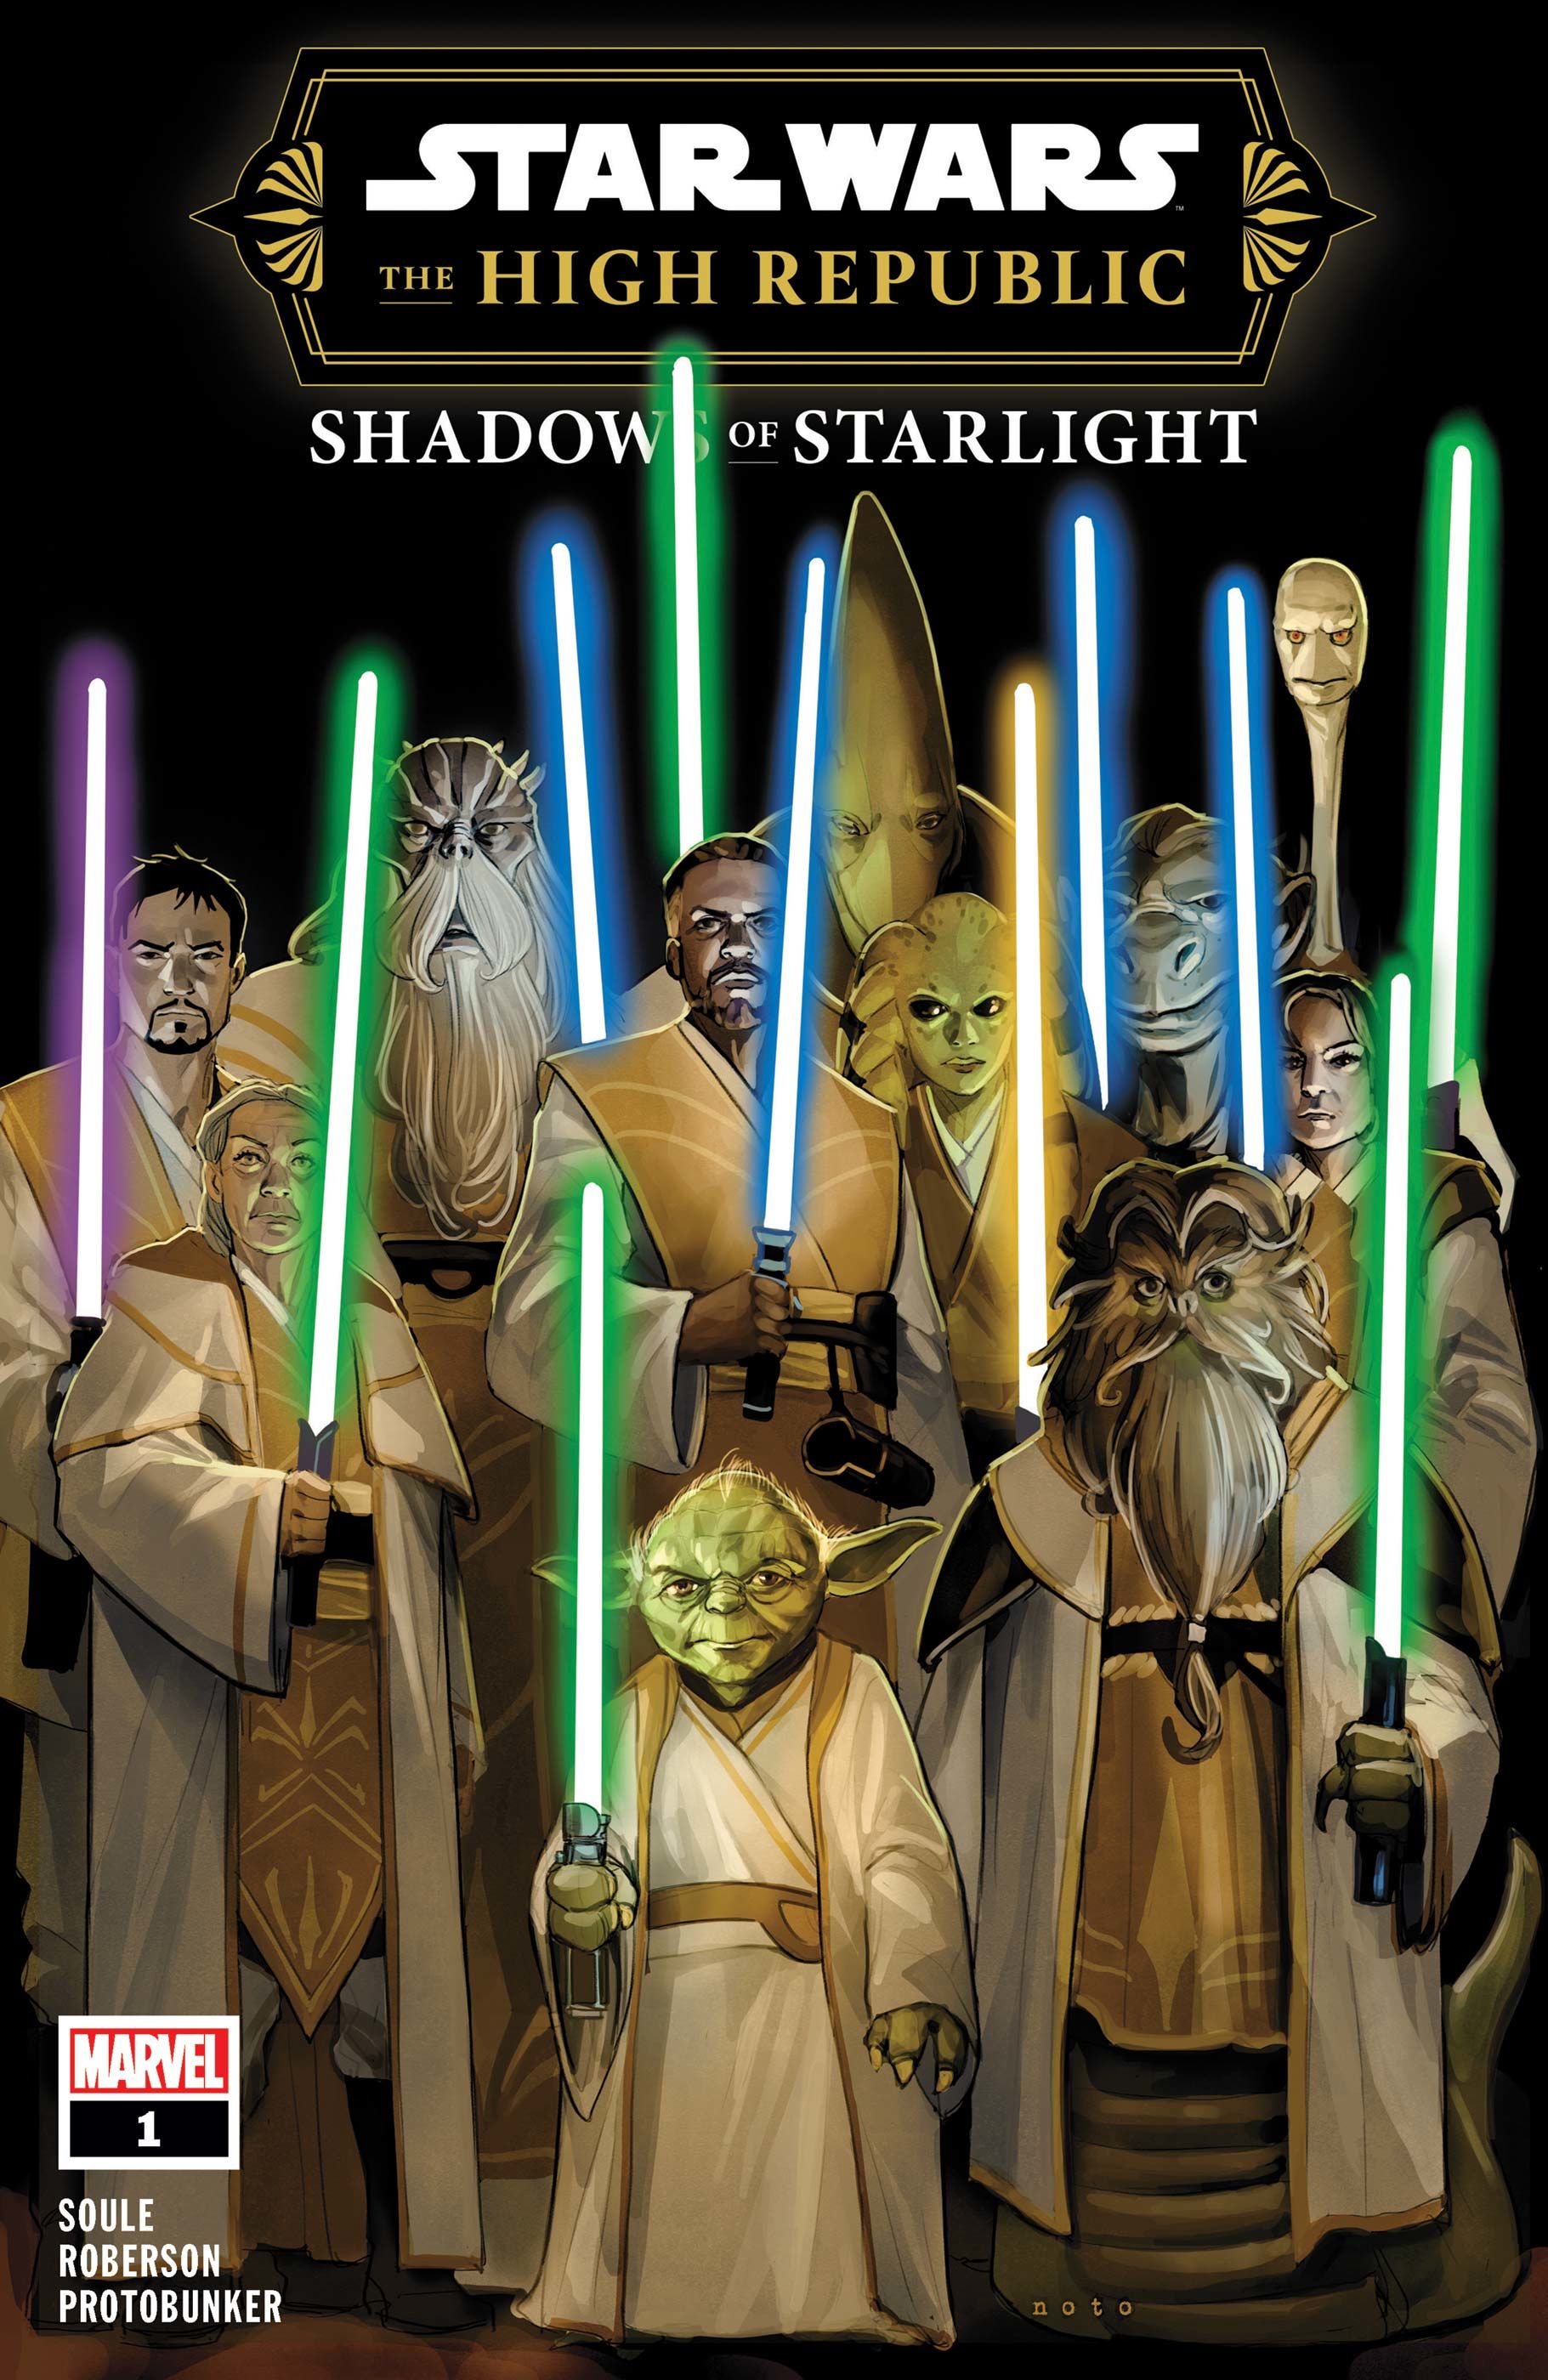 Jedi stand together on the Star Wars The High Republic Shadows of Starlight 1 Phil Noto cover